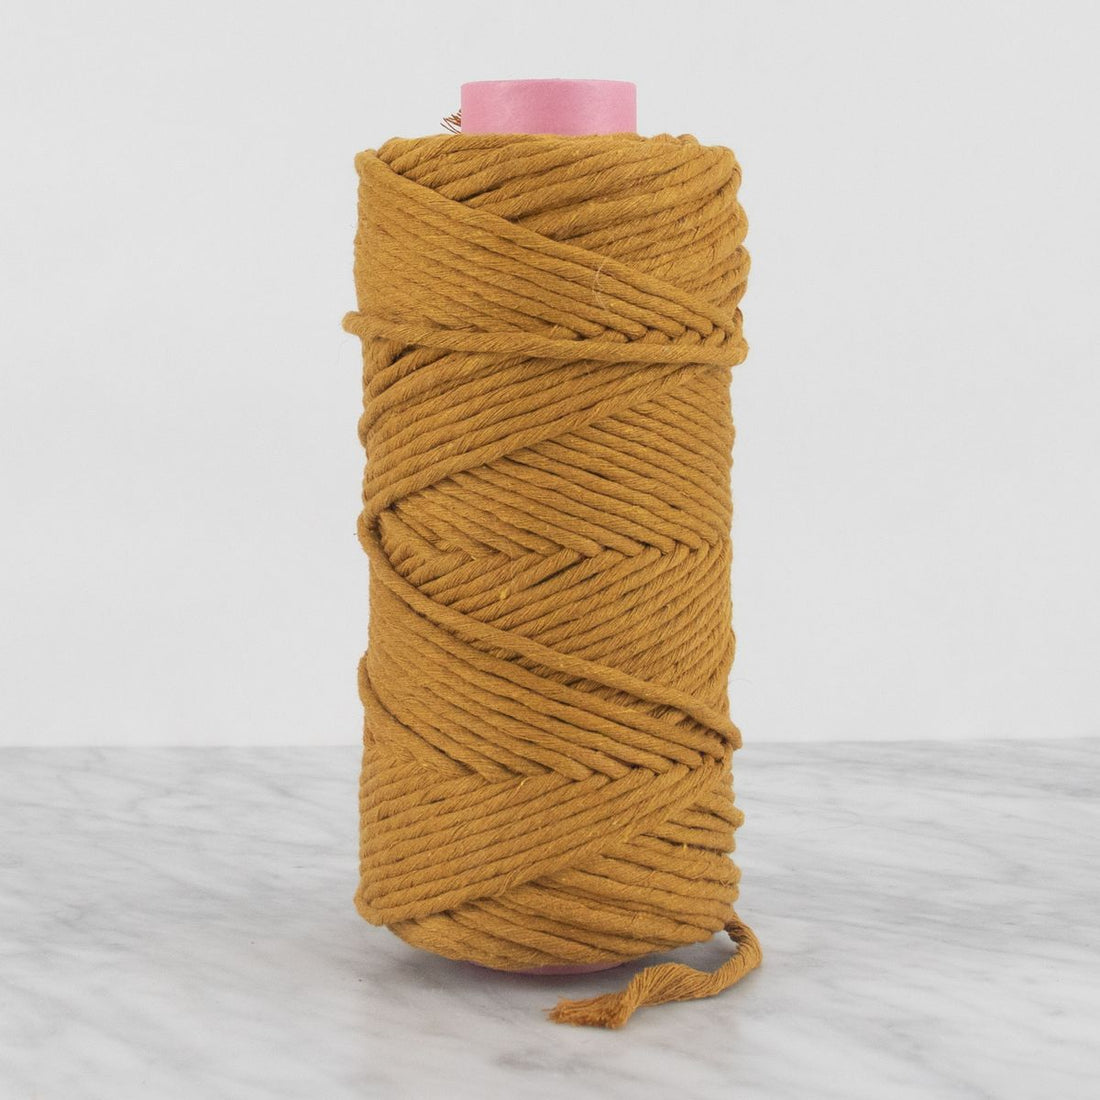 5mm Recycled Cotton String 0.5 kg - Ochre